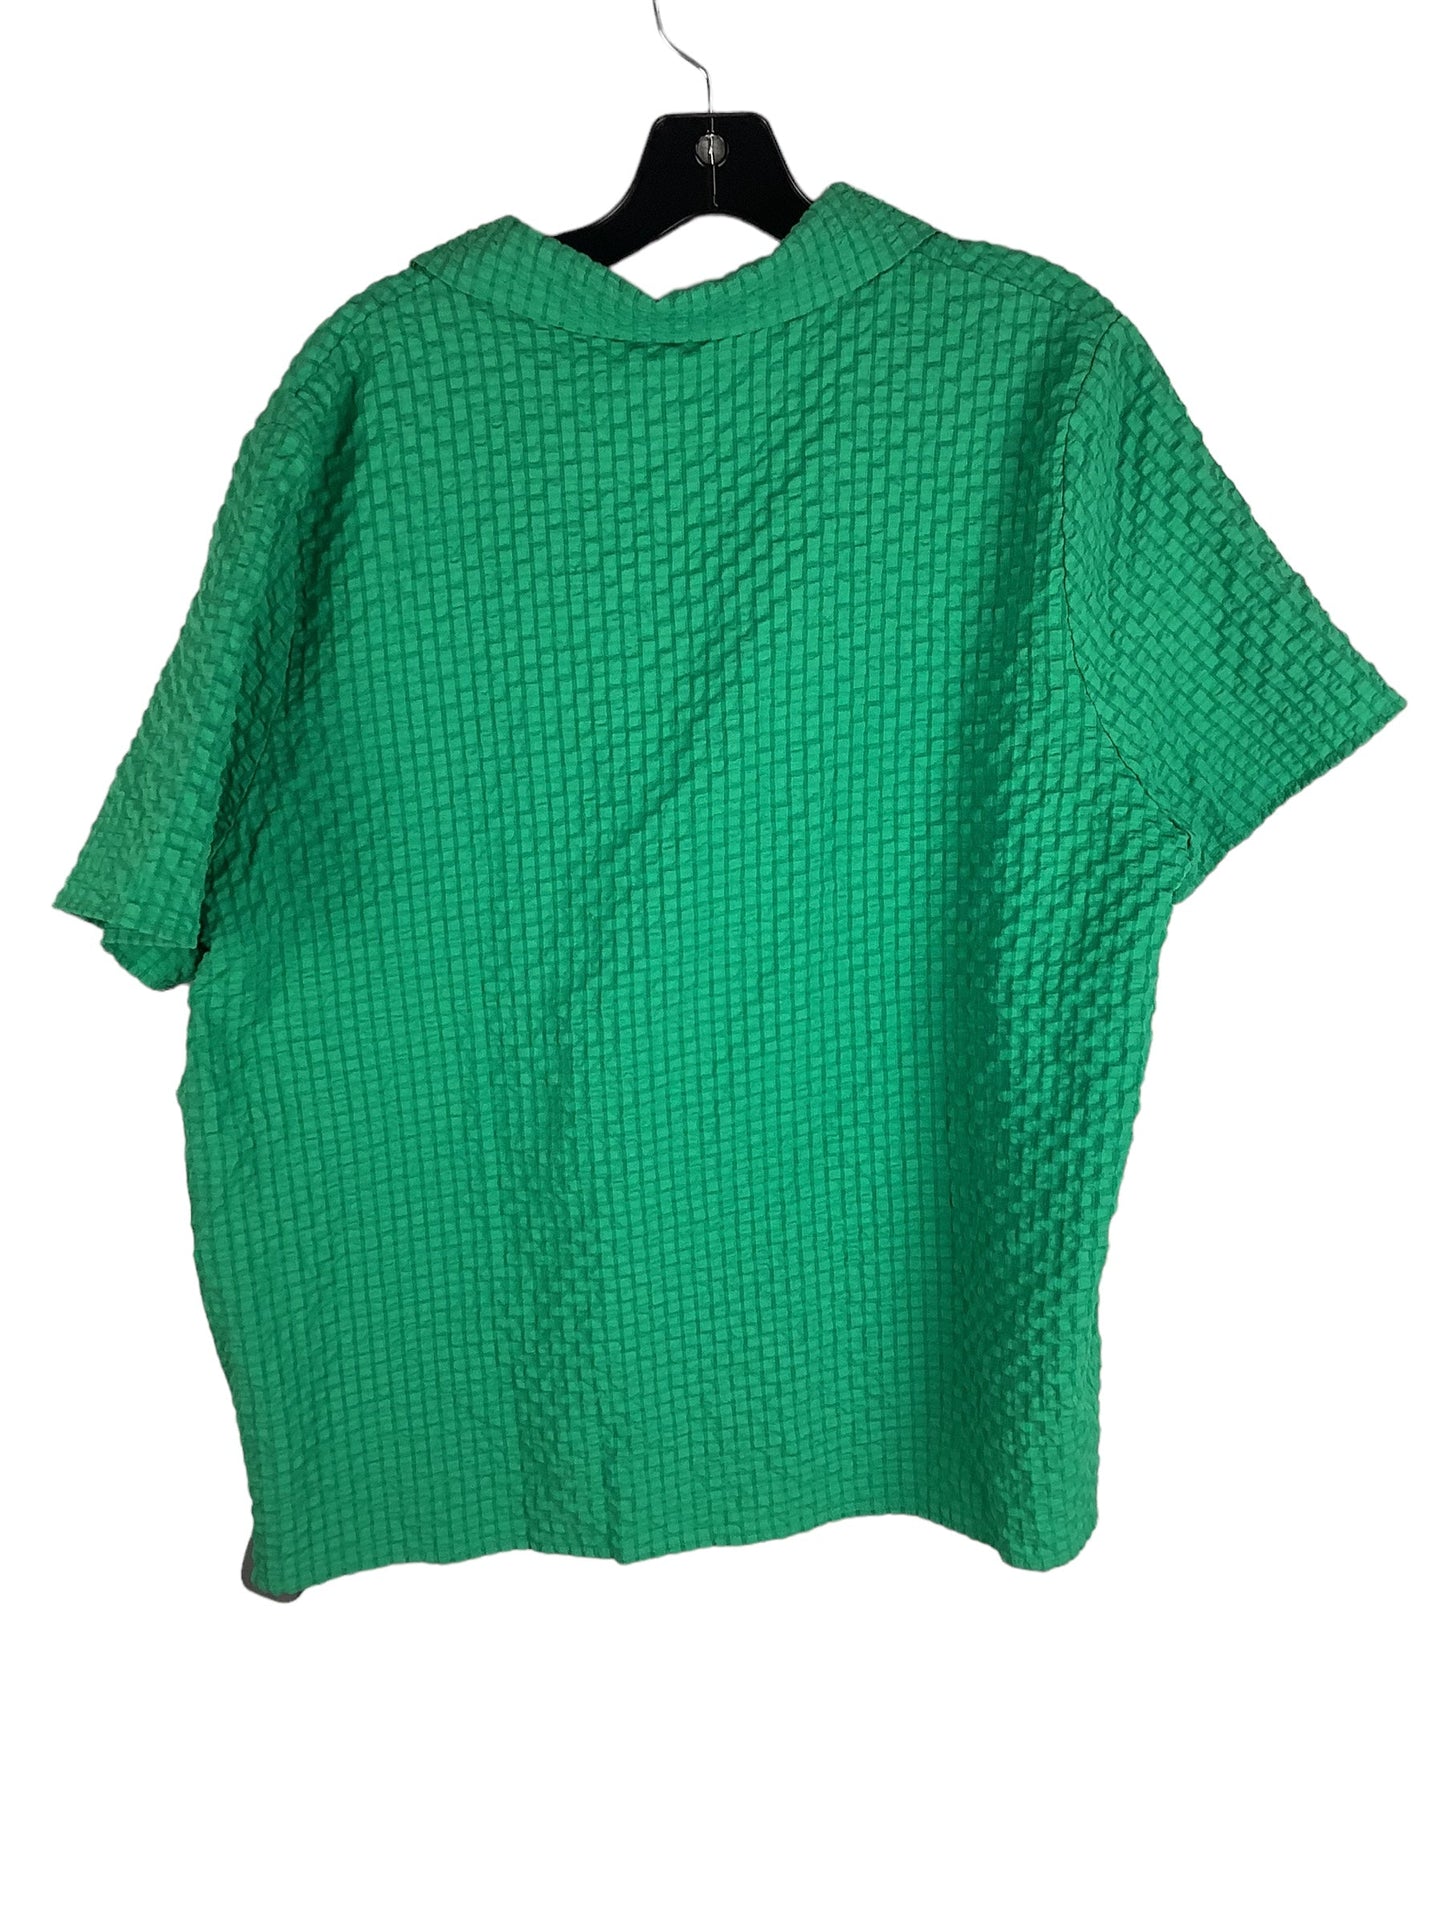 Green Top Short Sleeve Le Lis, Size L